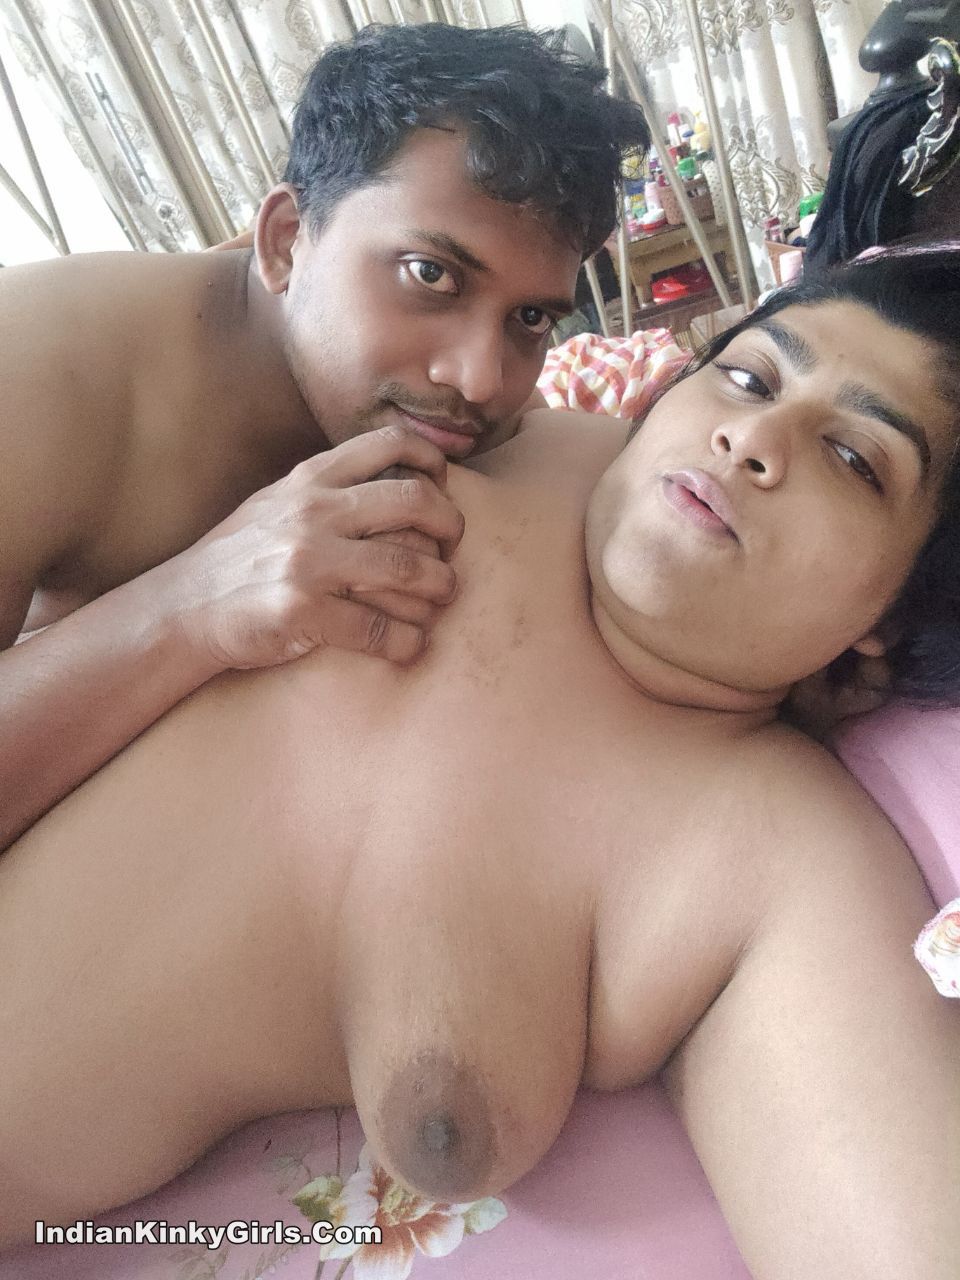 Indian Husband Enjoying Sex With Sister-In-Law